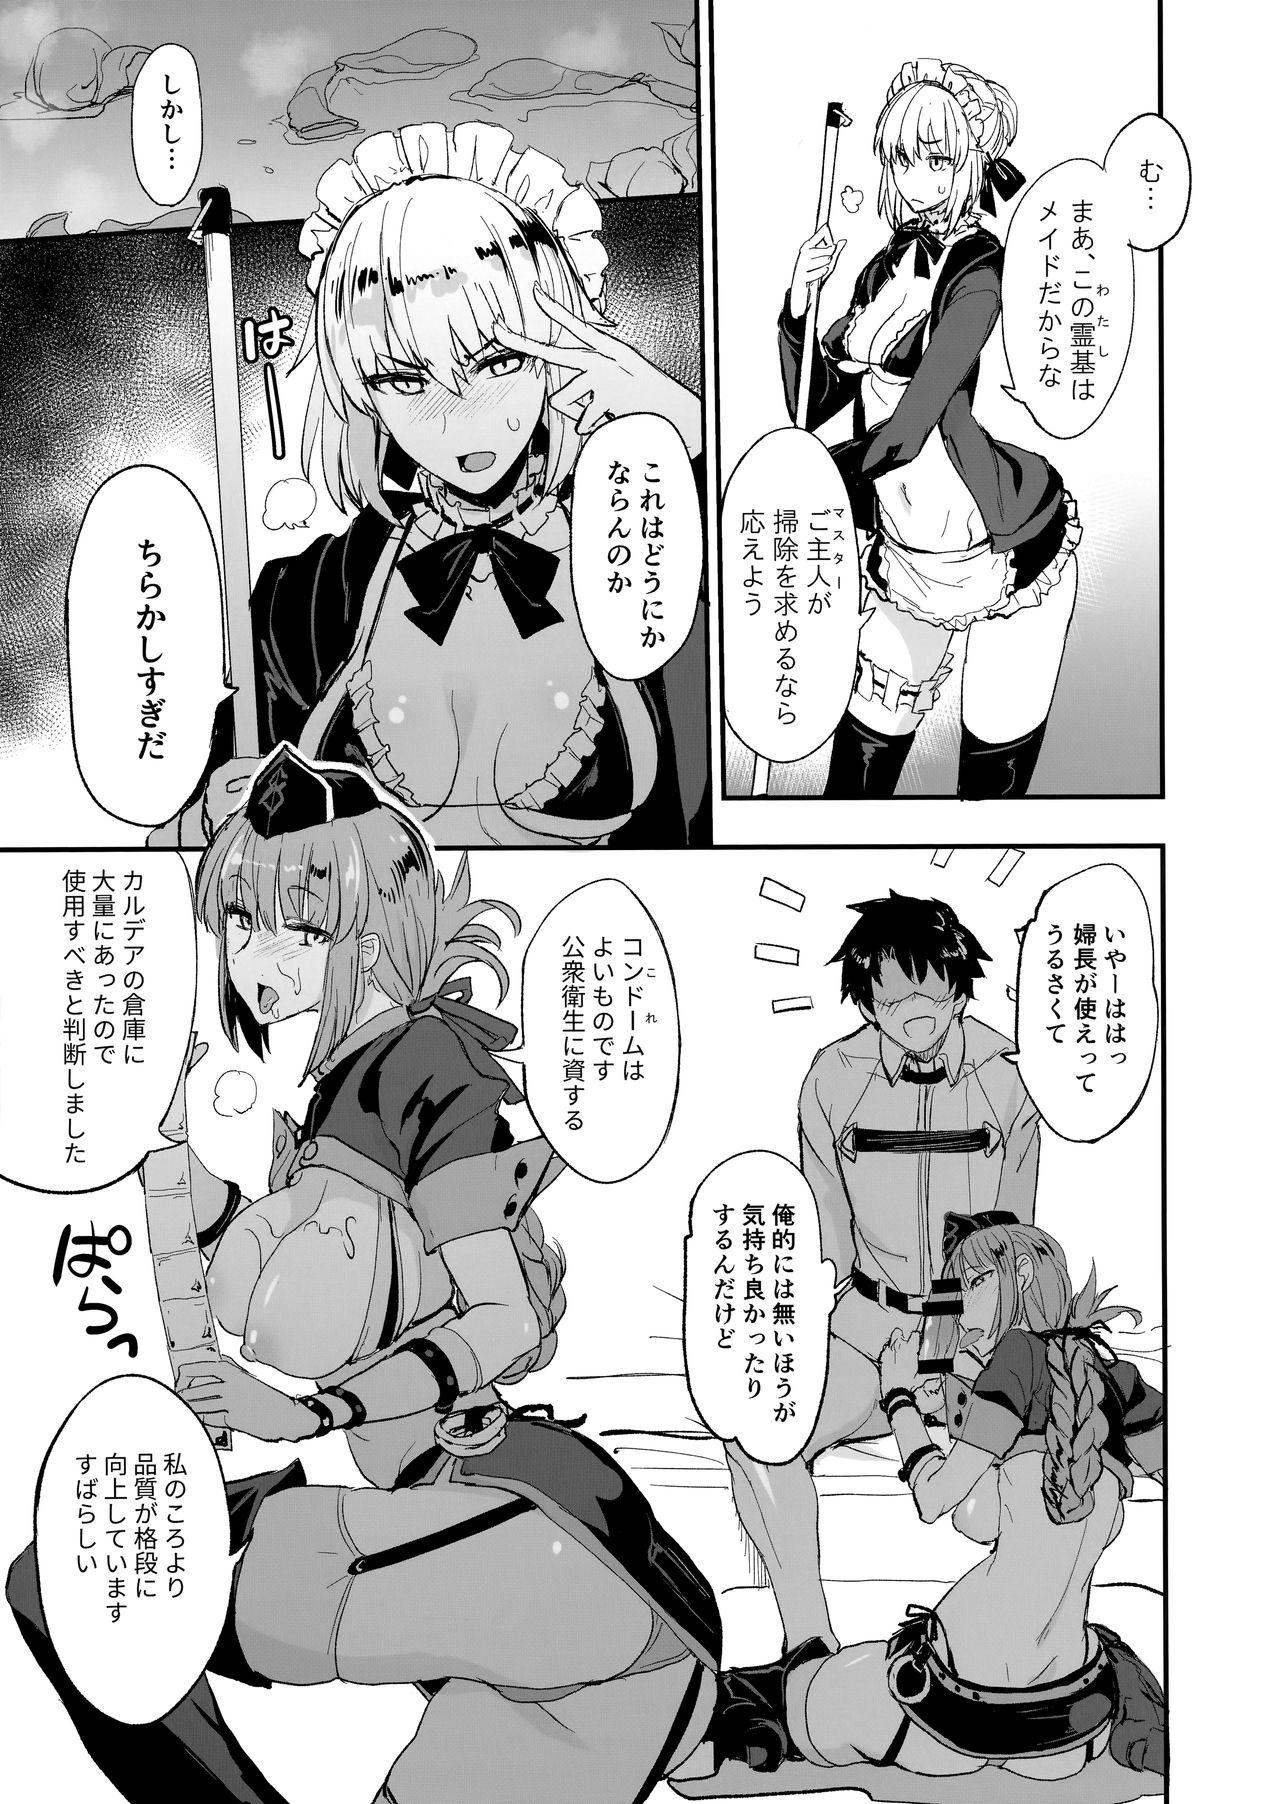 Atm FGO no Erohon 2 - Fate grand order Hairy Pussy - Page 6